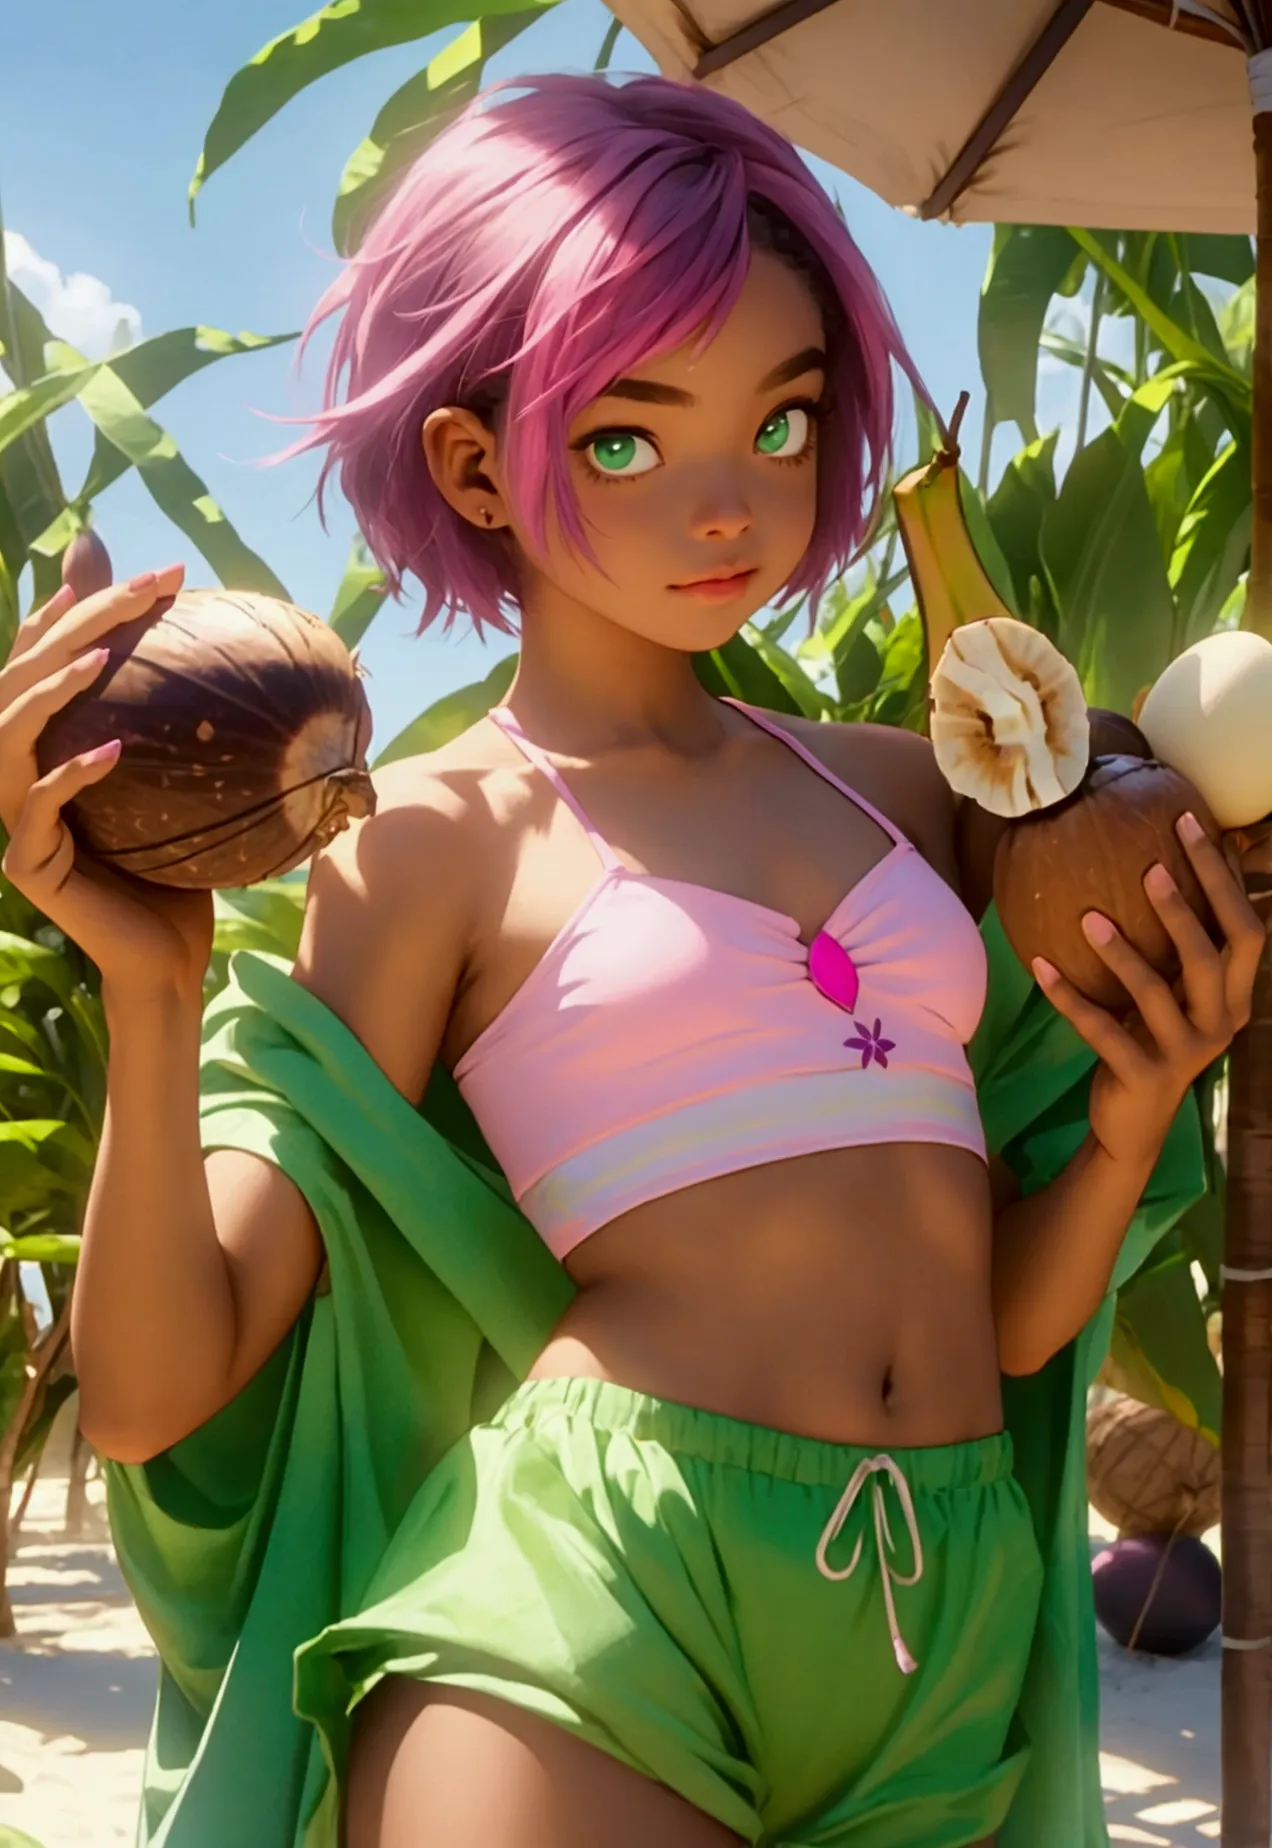 ((Artwork, high quality)), (black girl), (pink hair), (green eyes), (wearing a beach outfit), (at a large party), (decorated wit...